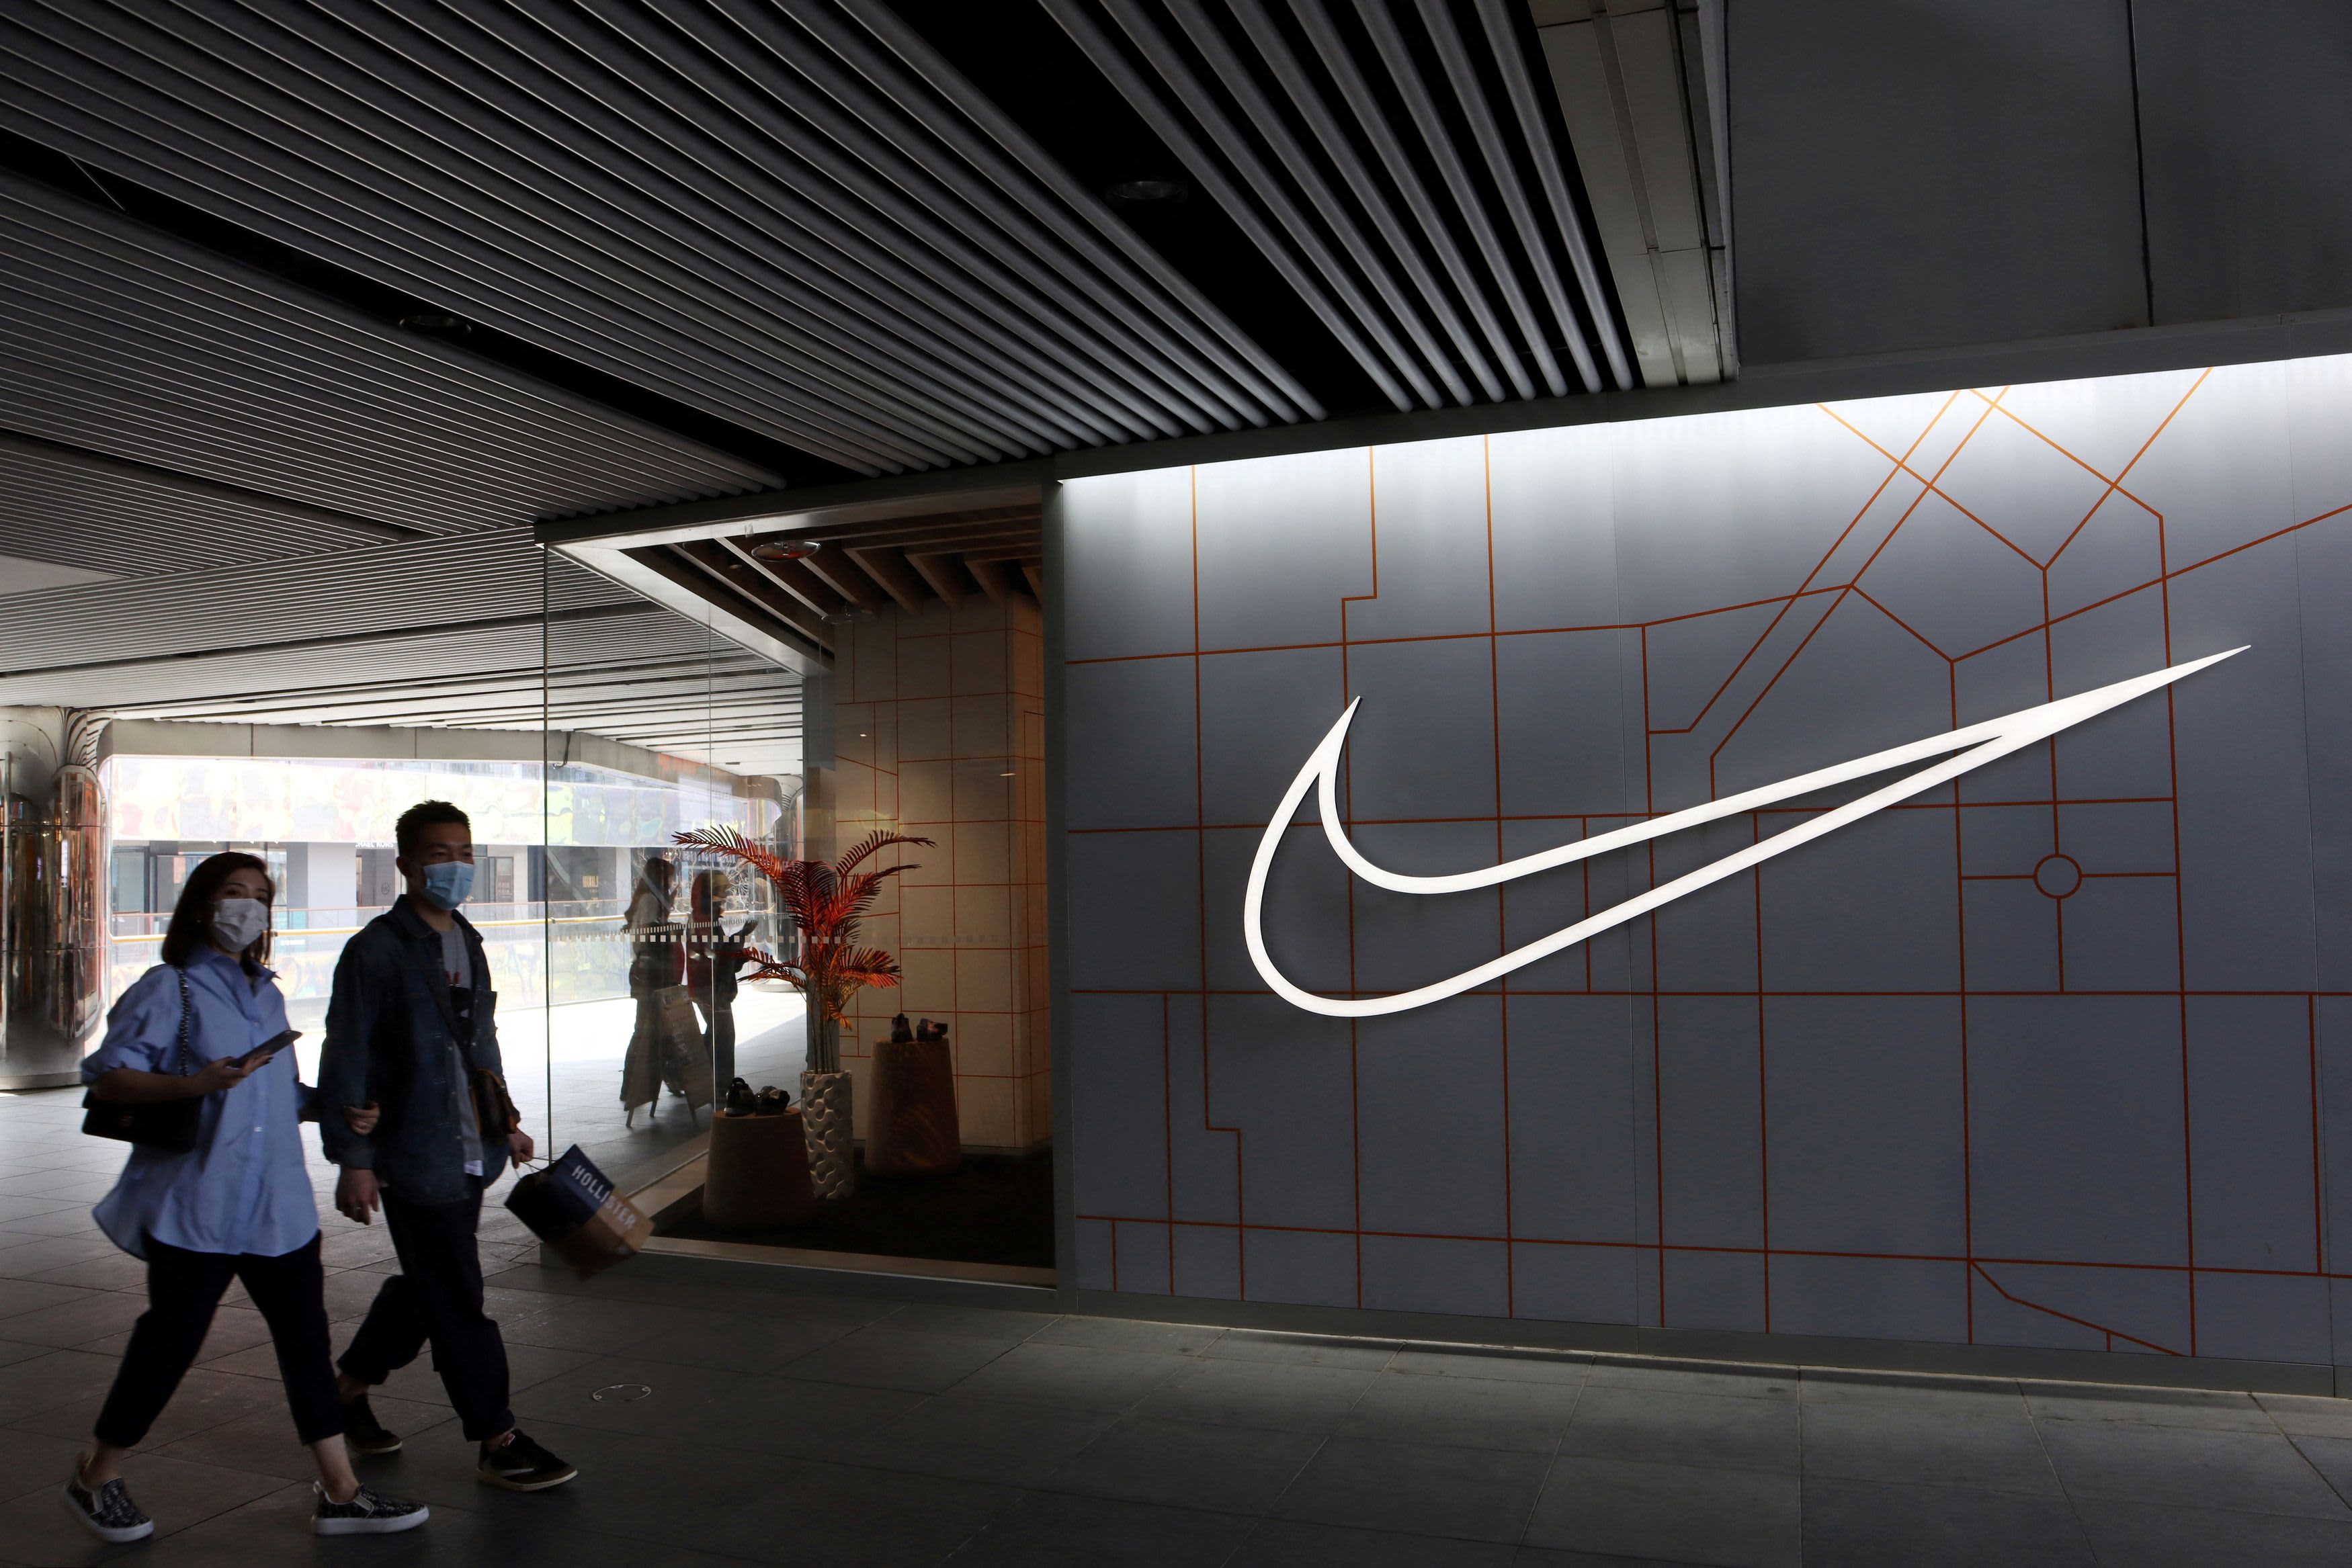 Nike faces shareholder proposal on human rights